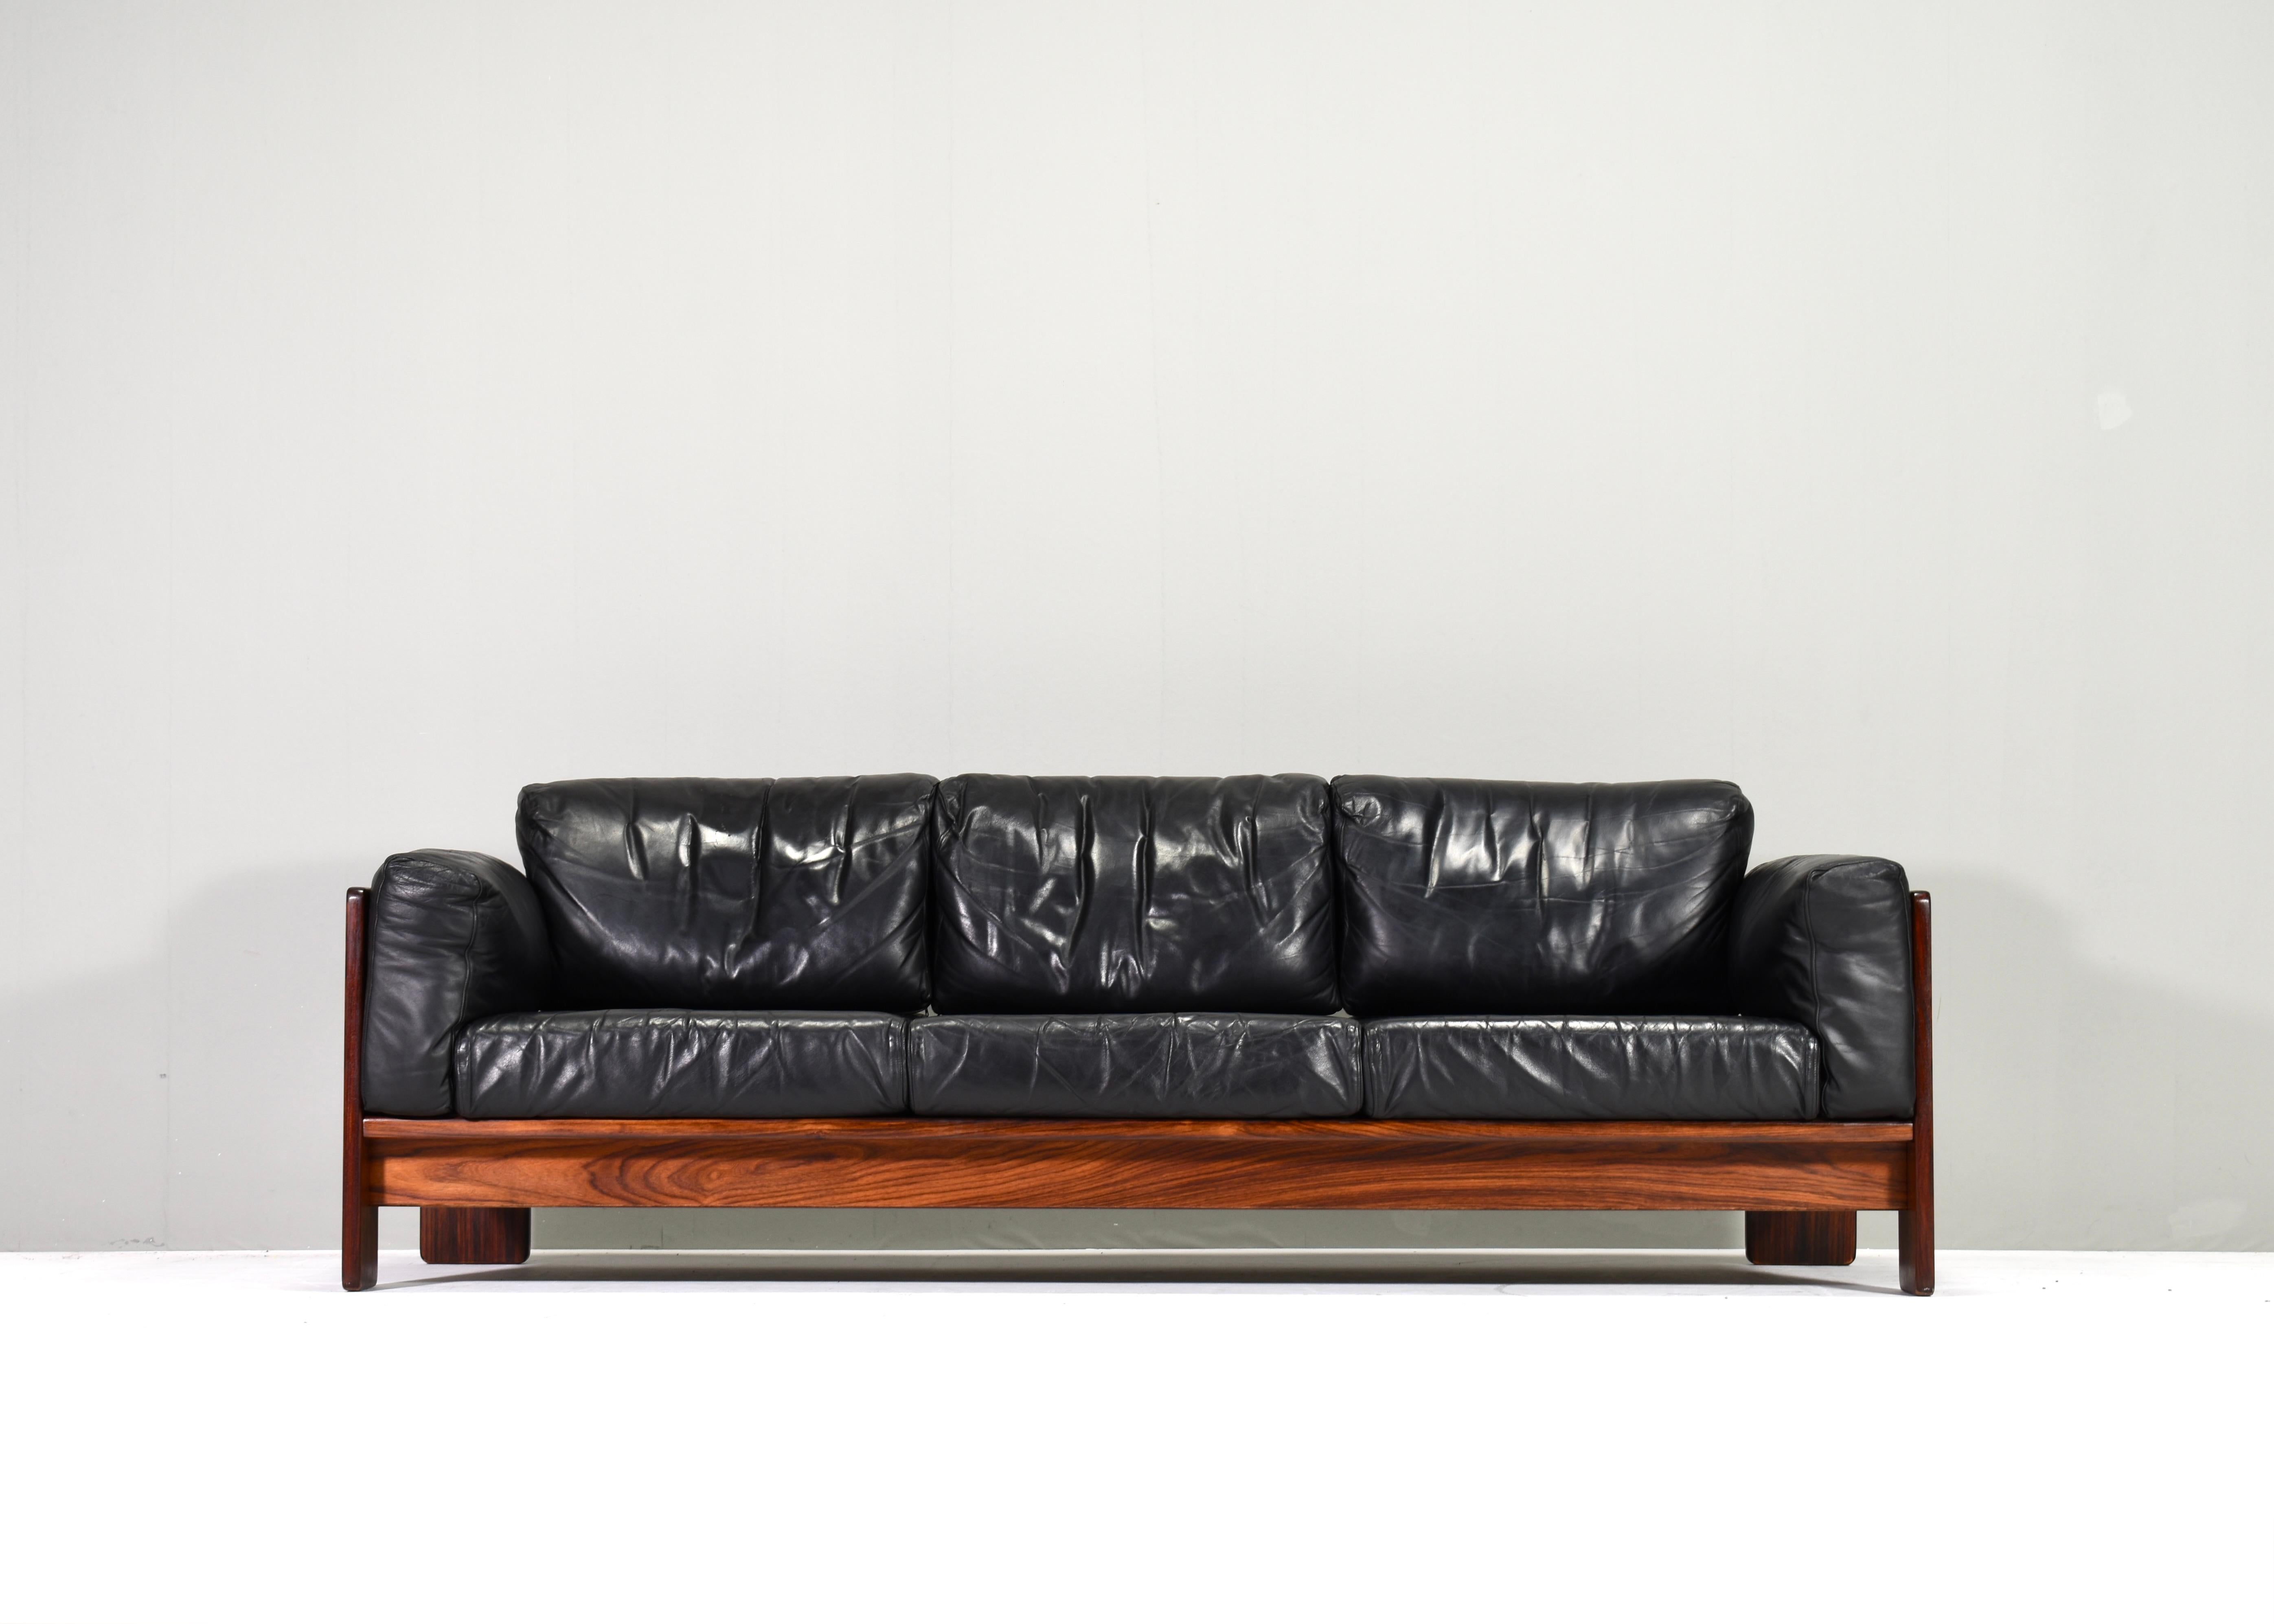 Italian BASTIANO Sofa in black leather by Afra and Tobia Scarpa for KNOLL – Italy, 1962 For Sale